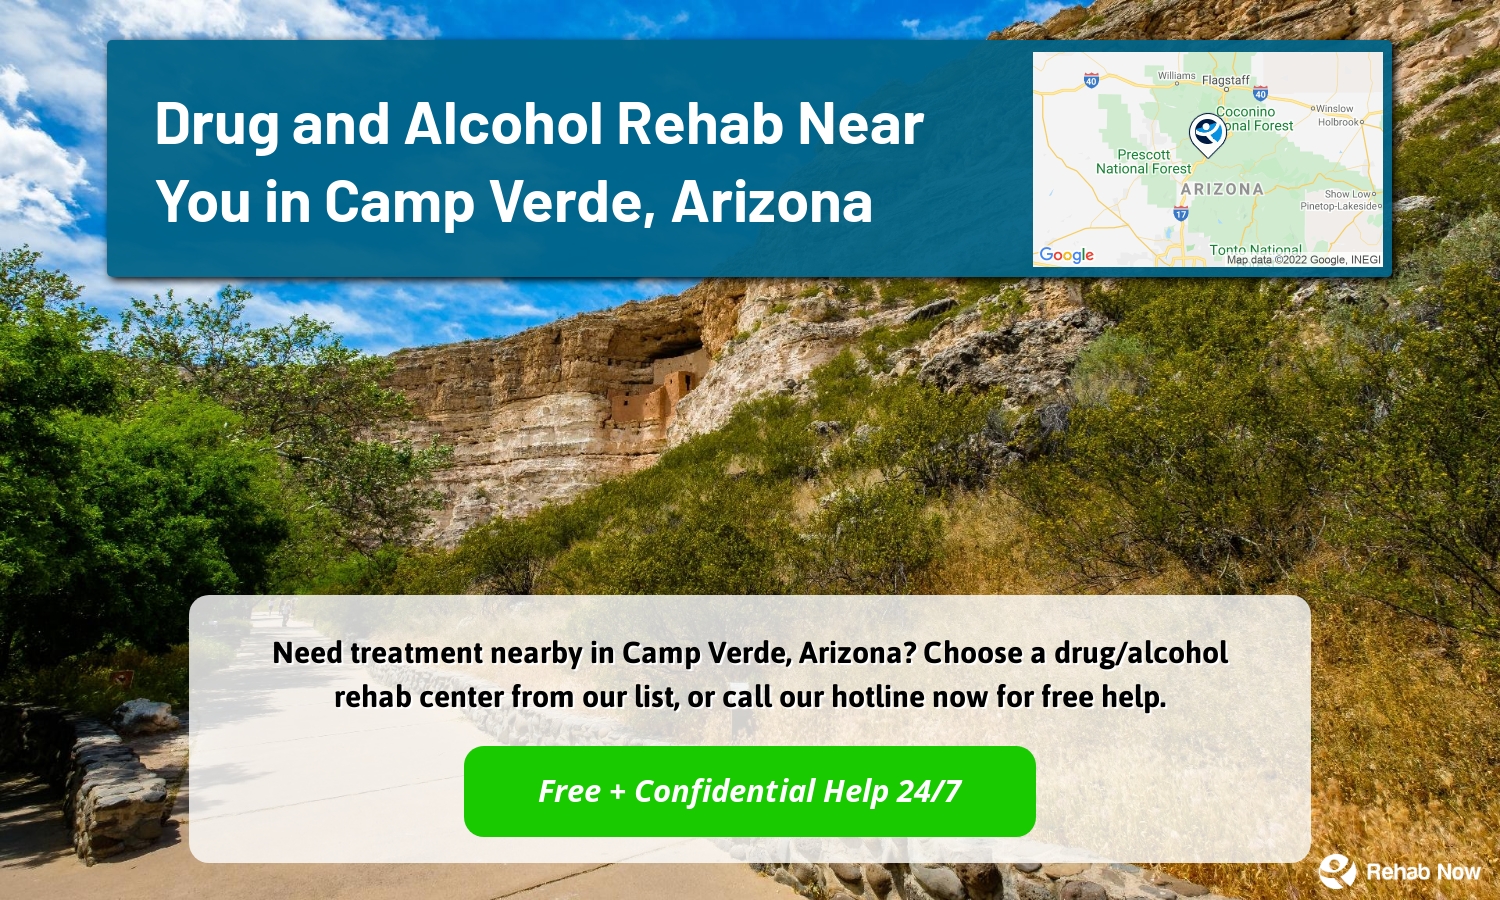 Need treatment nearby in Camp Verde, Arizona? Choose a drug/alcohol rehab center from our list, or call our hotline now for free help.